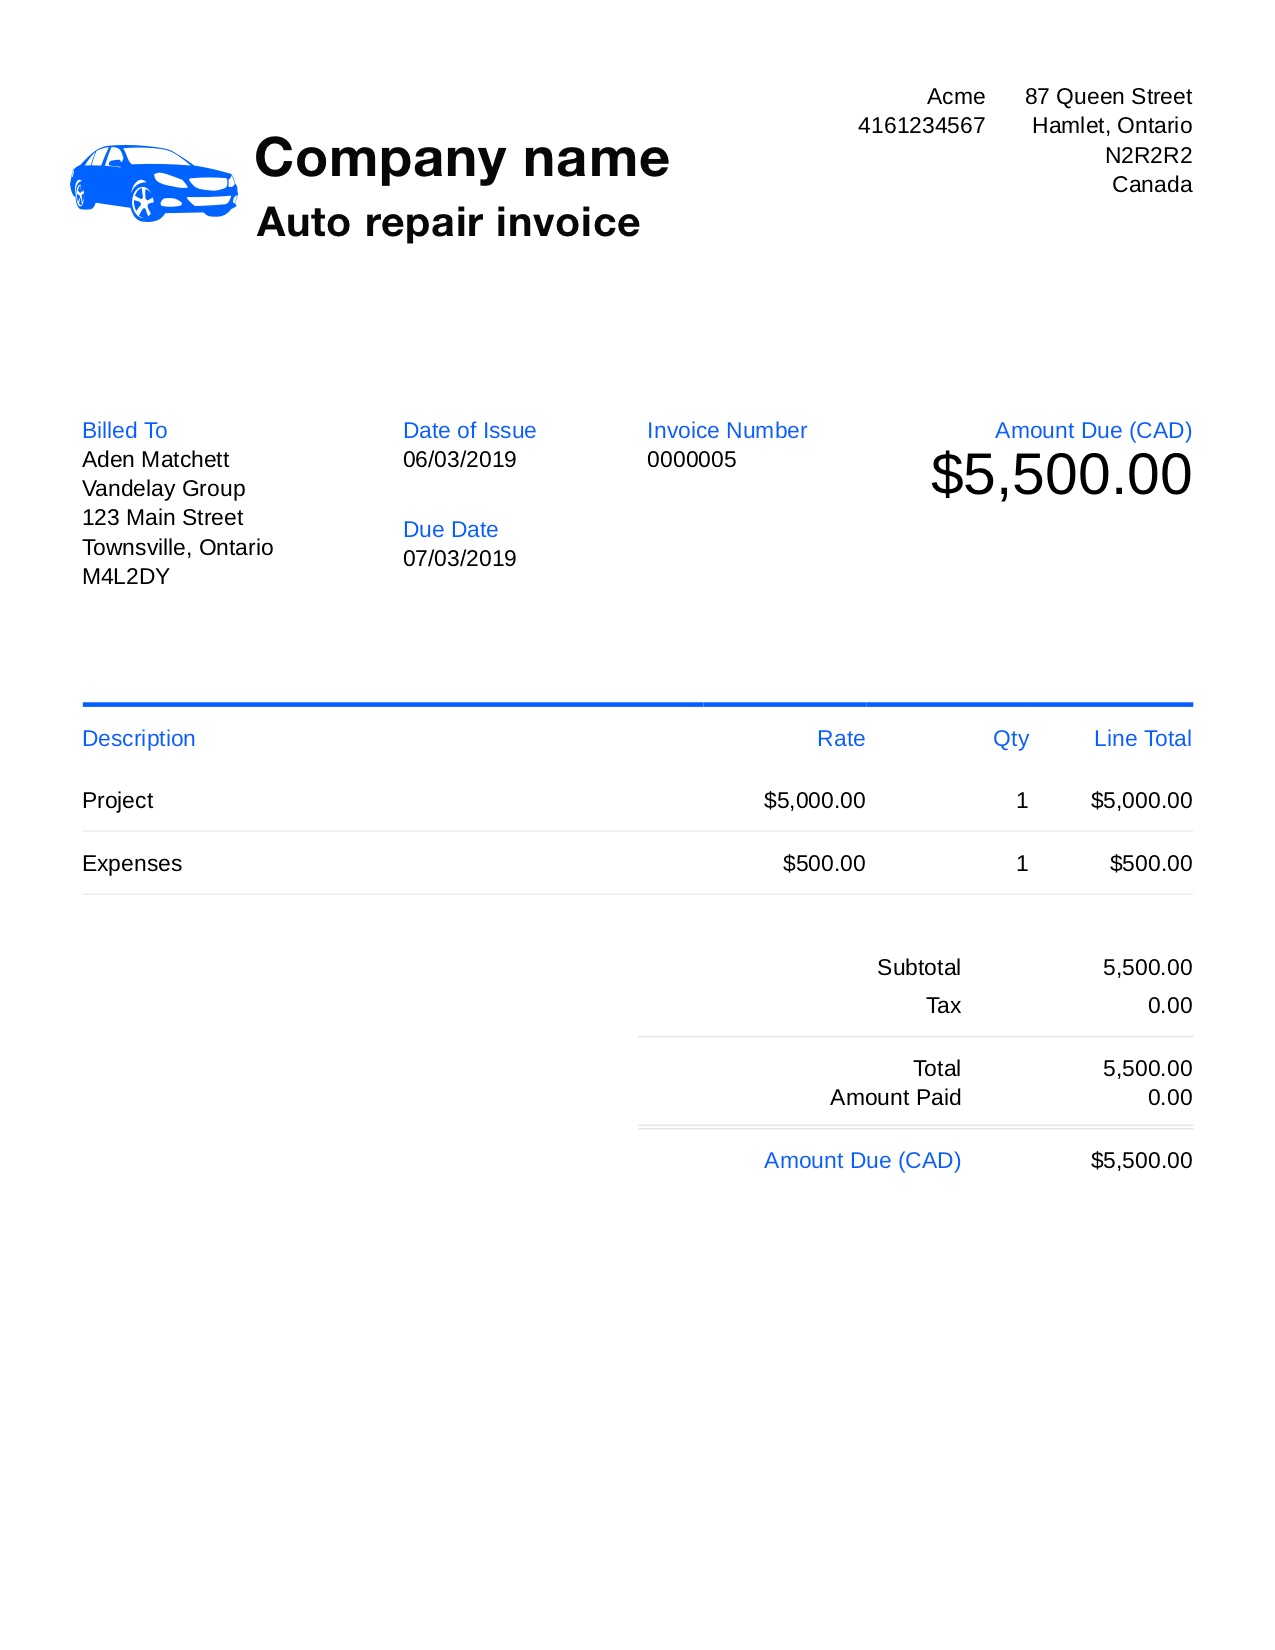 Free Auto Repair Invoice Template. Customize and Send in 23 Seconds Throughout Mechanic Shop Invoice Templates